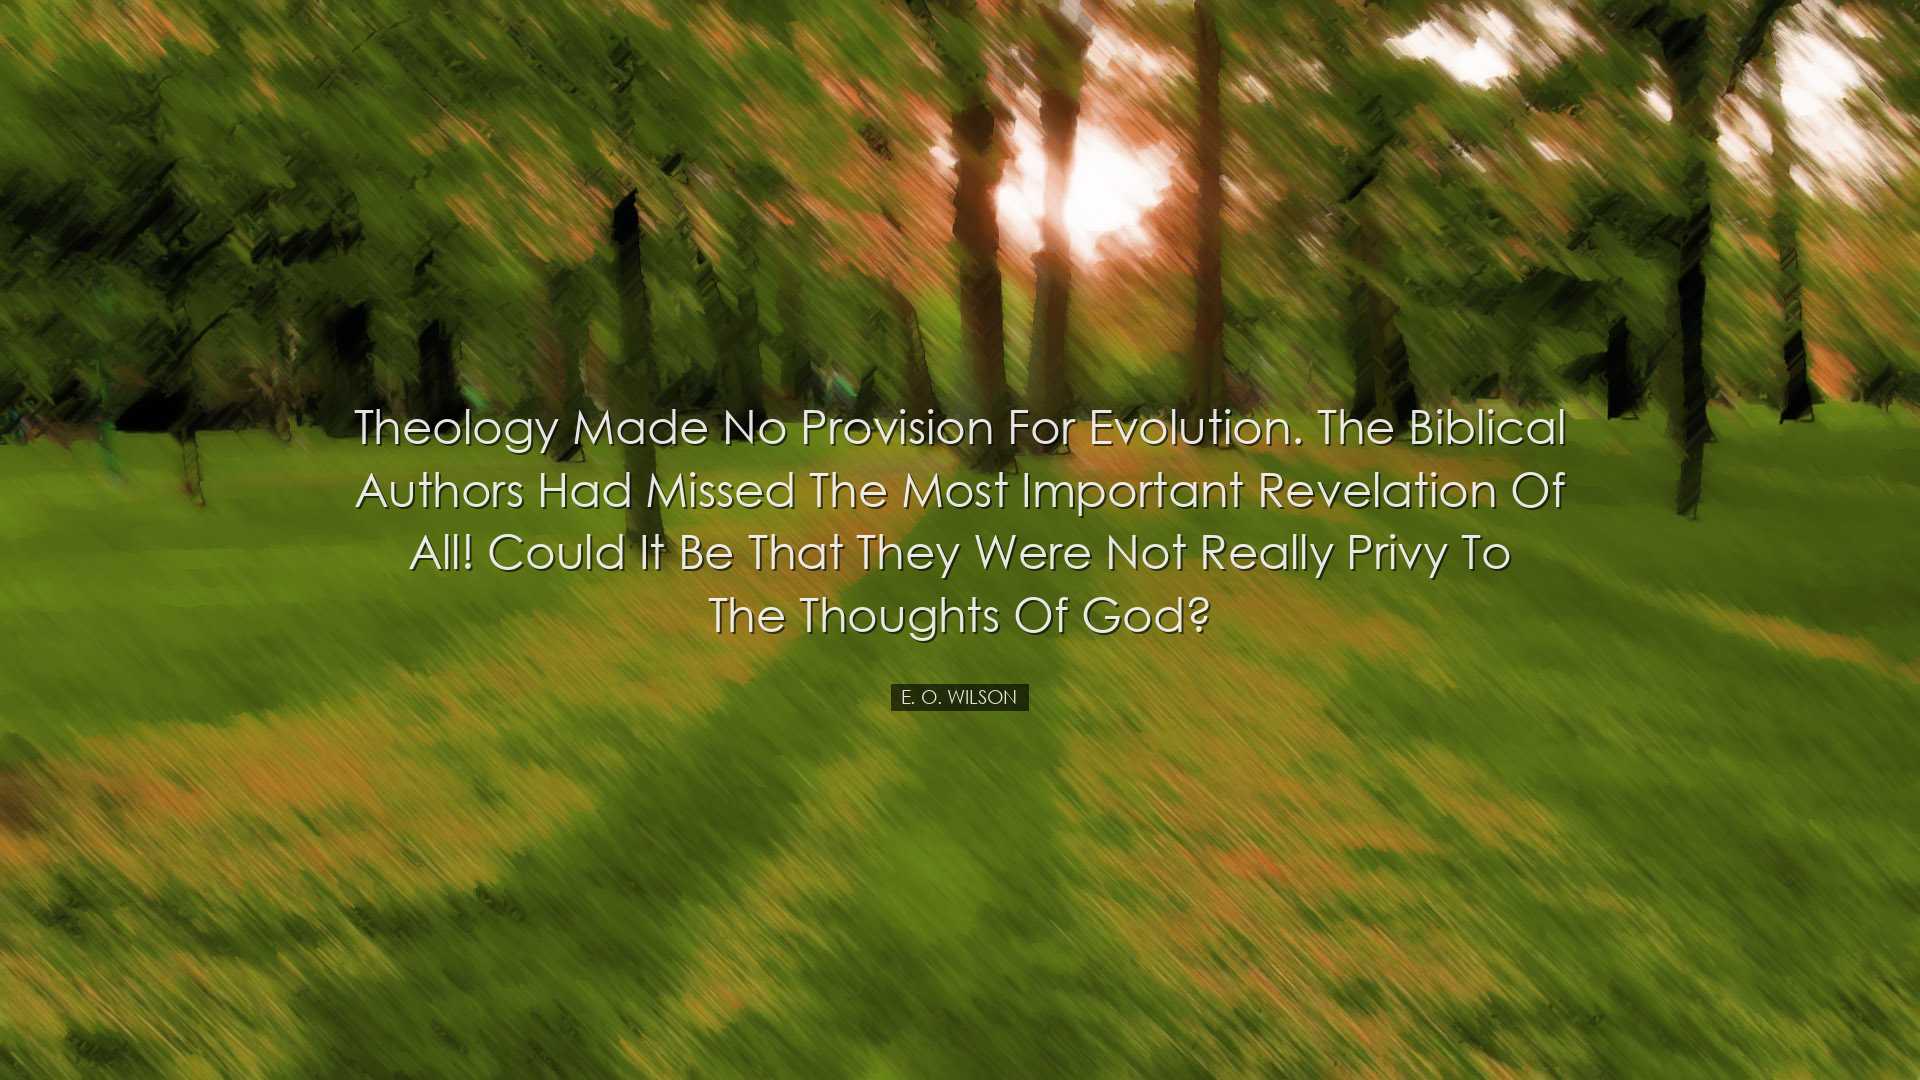 Theology made no provision for evolution. The biblical authors had